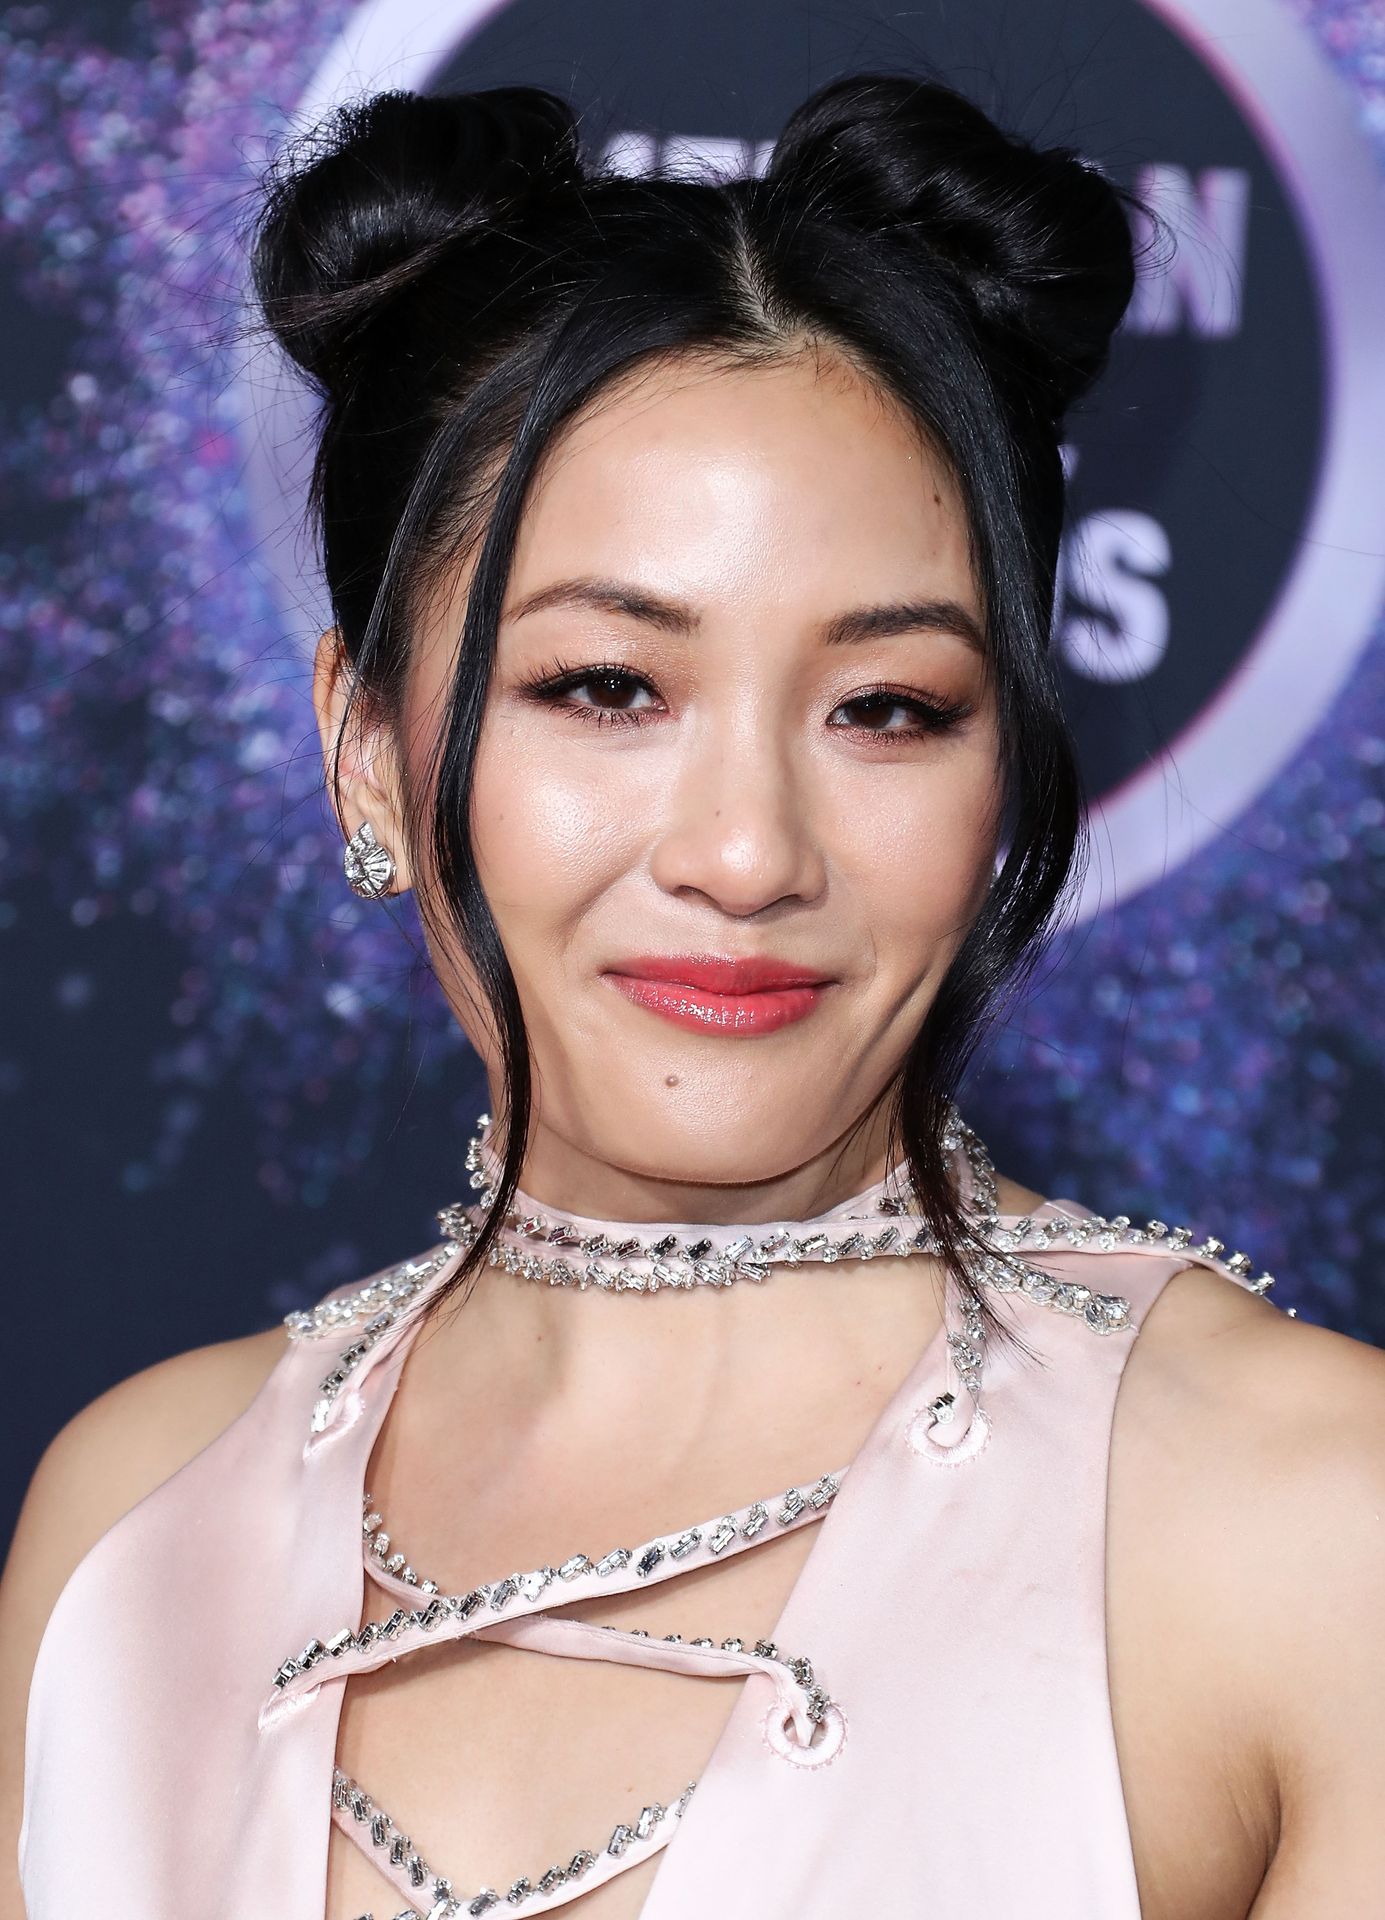 Braless Constance Wu was photographed on the red carpet at the American Mus...